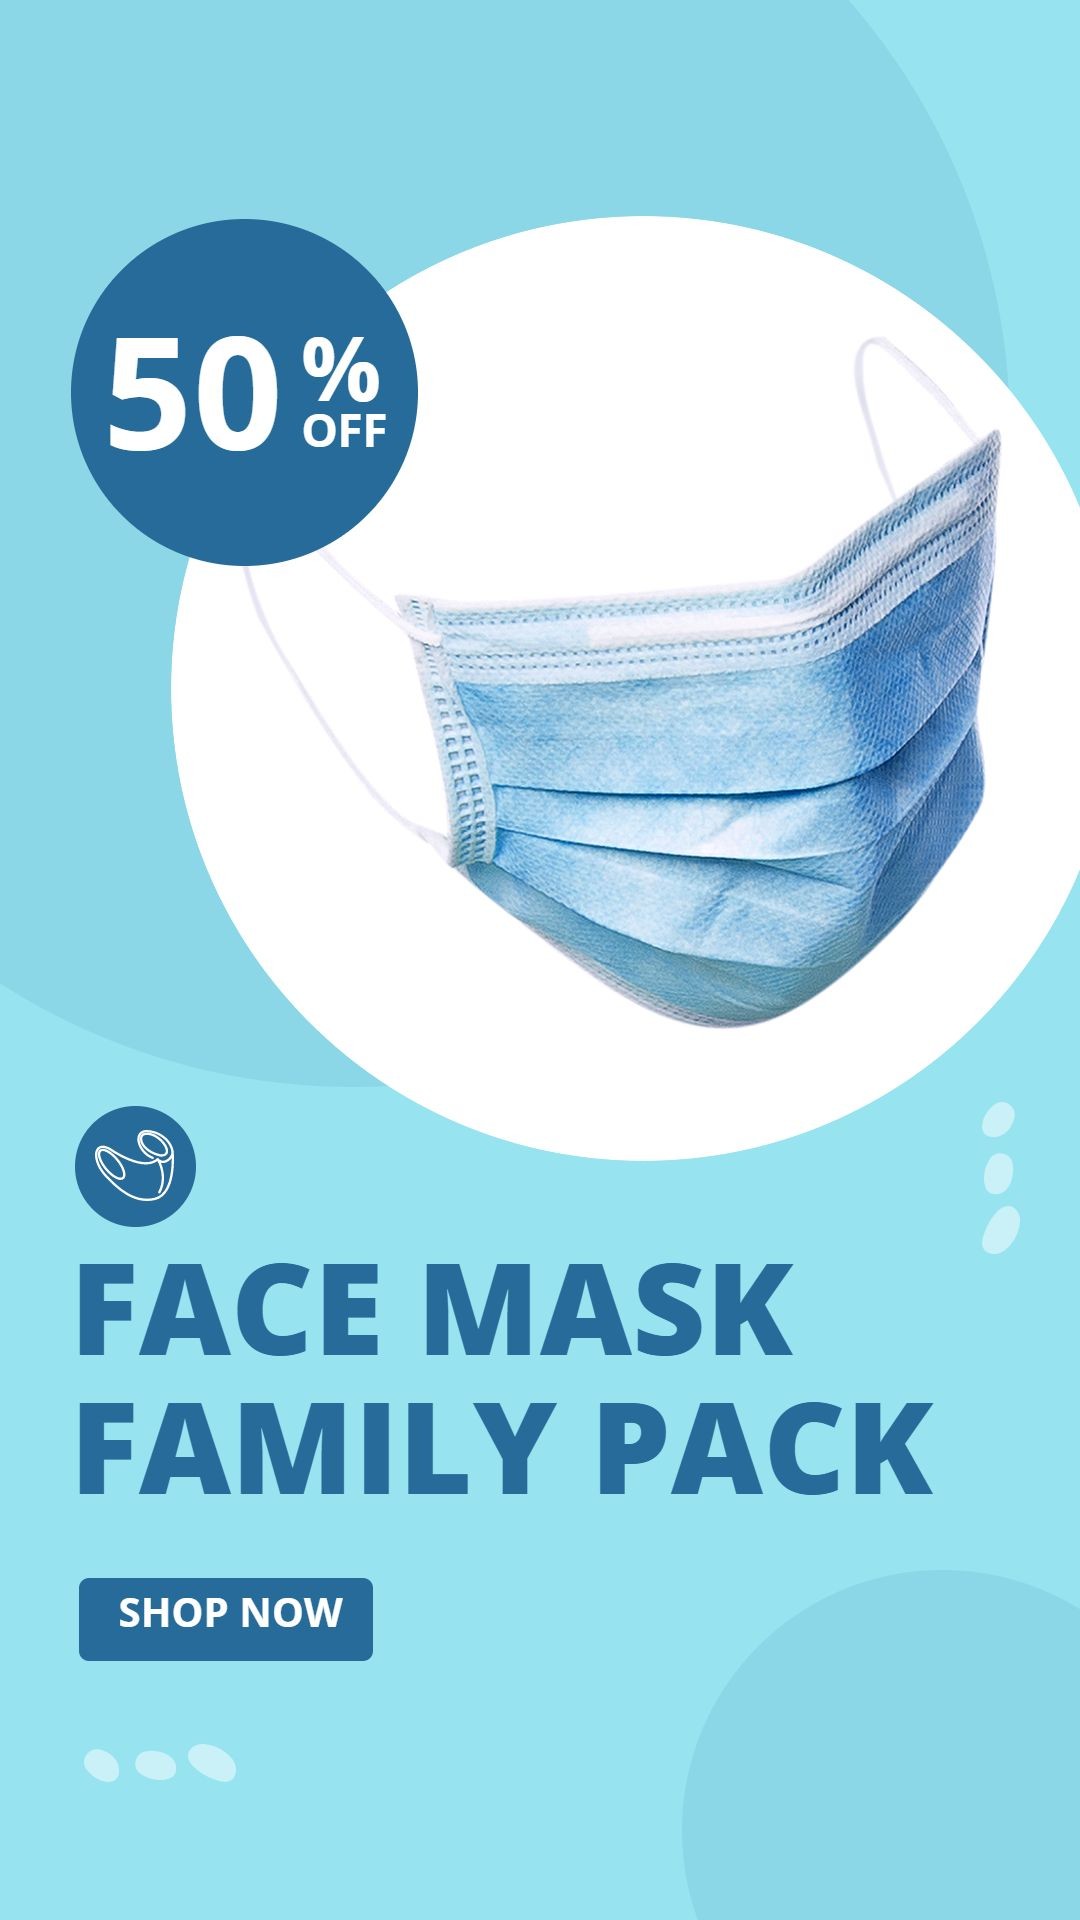 Circle Icon Home Medical Face Mask Sale Promo Discount Ecommerce Story预览效果